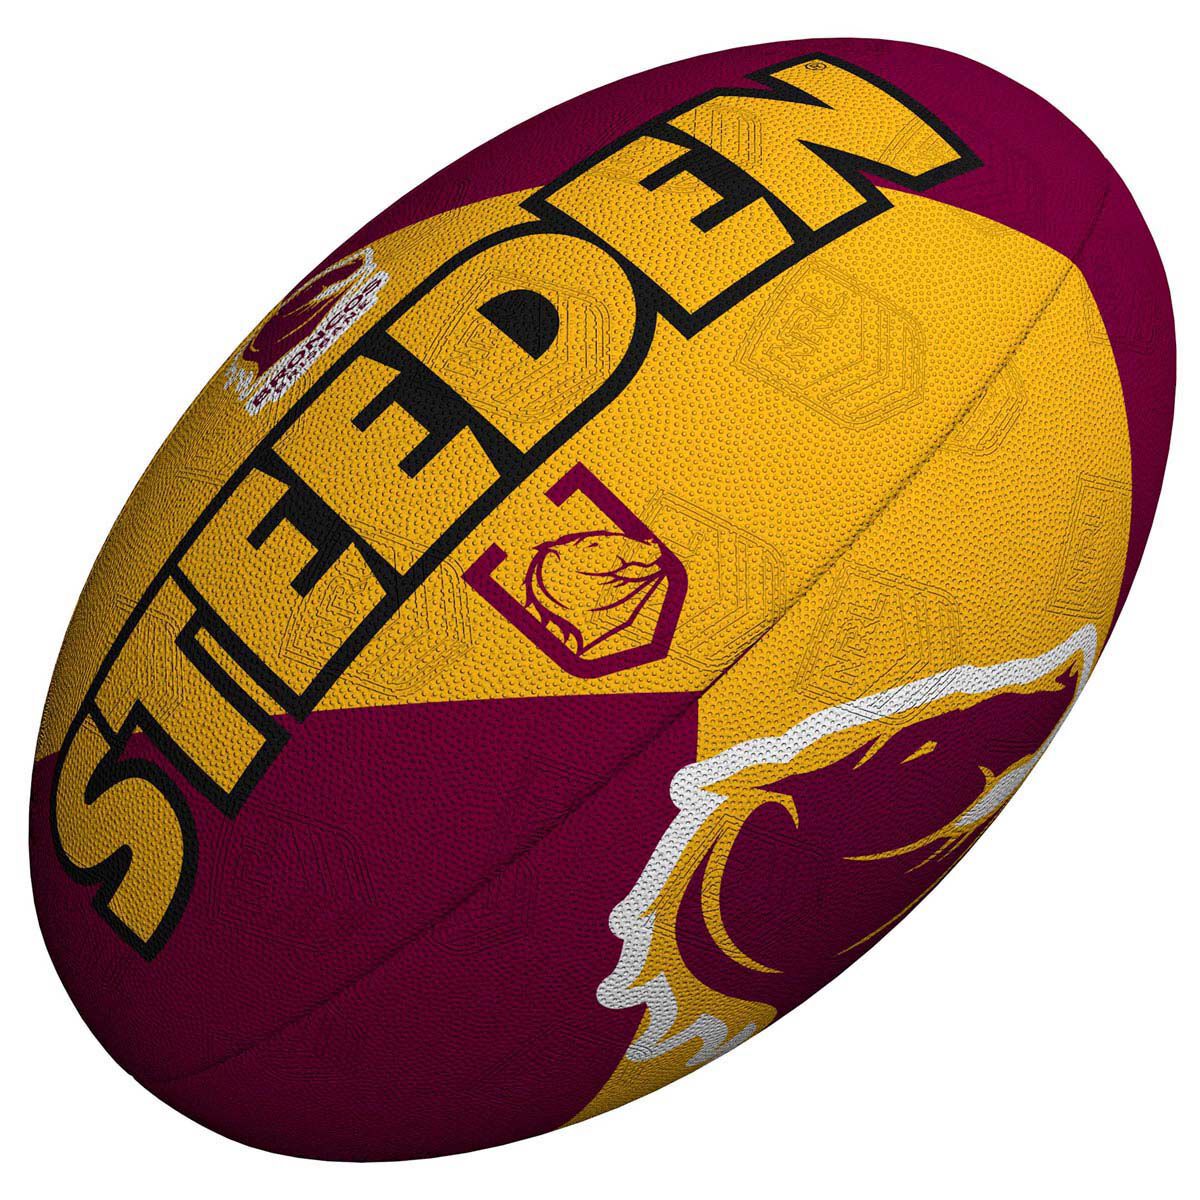 Ball Queensland Maroons NRL 6 Inch Supporter Sponge Football QLD 